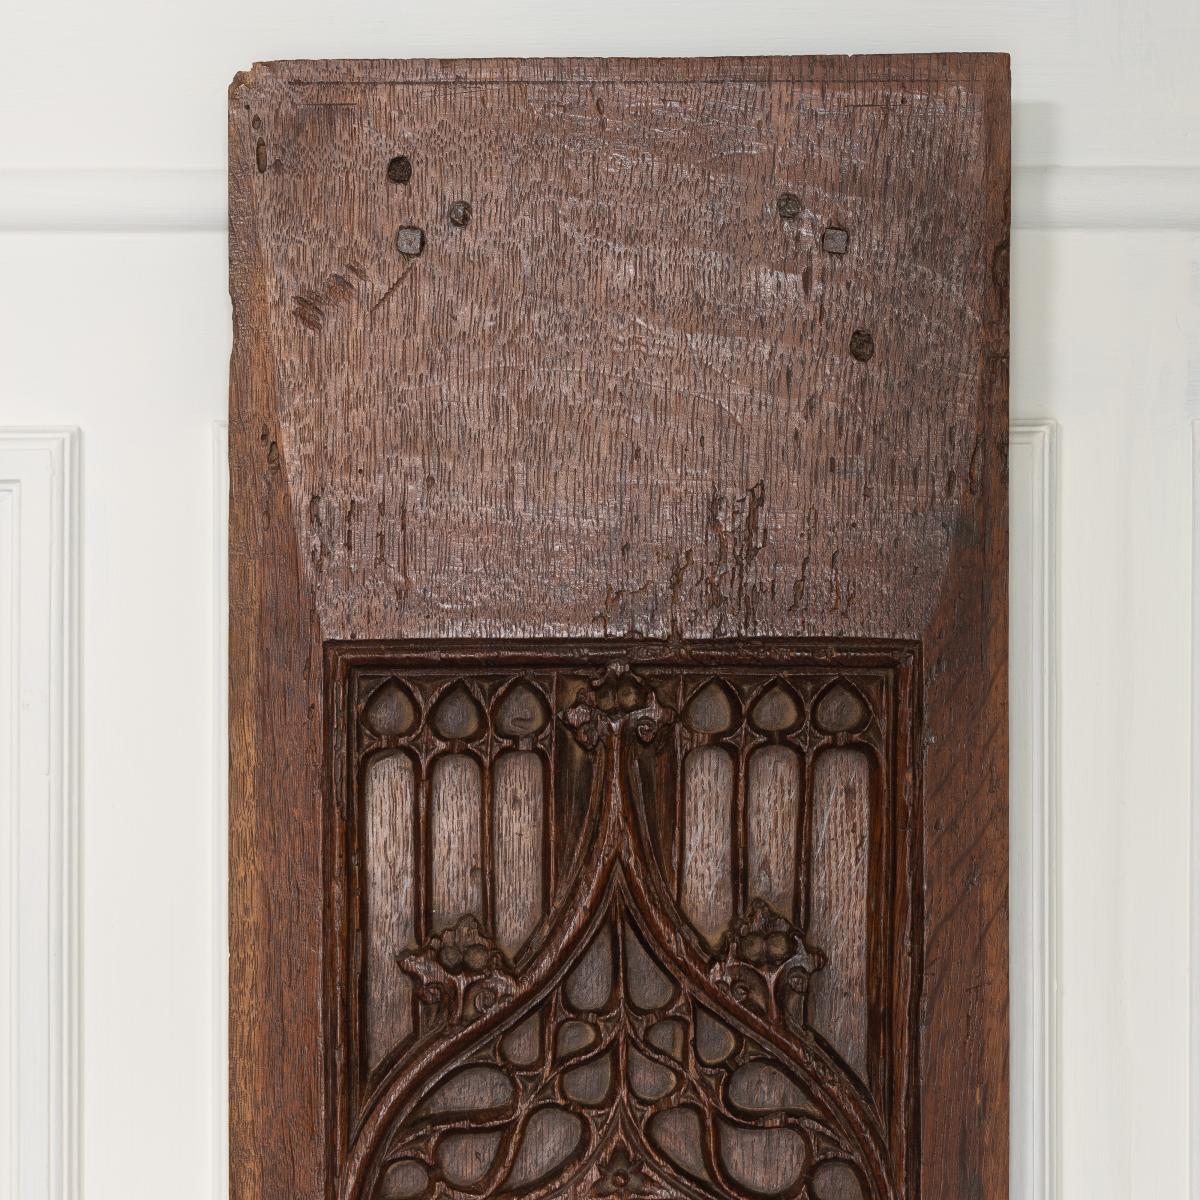 A late medieval carved oak panel, detail